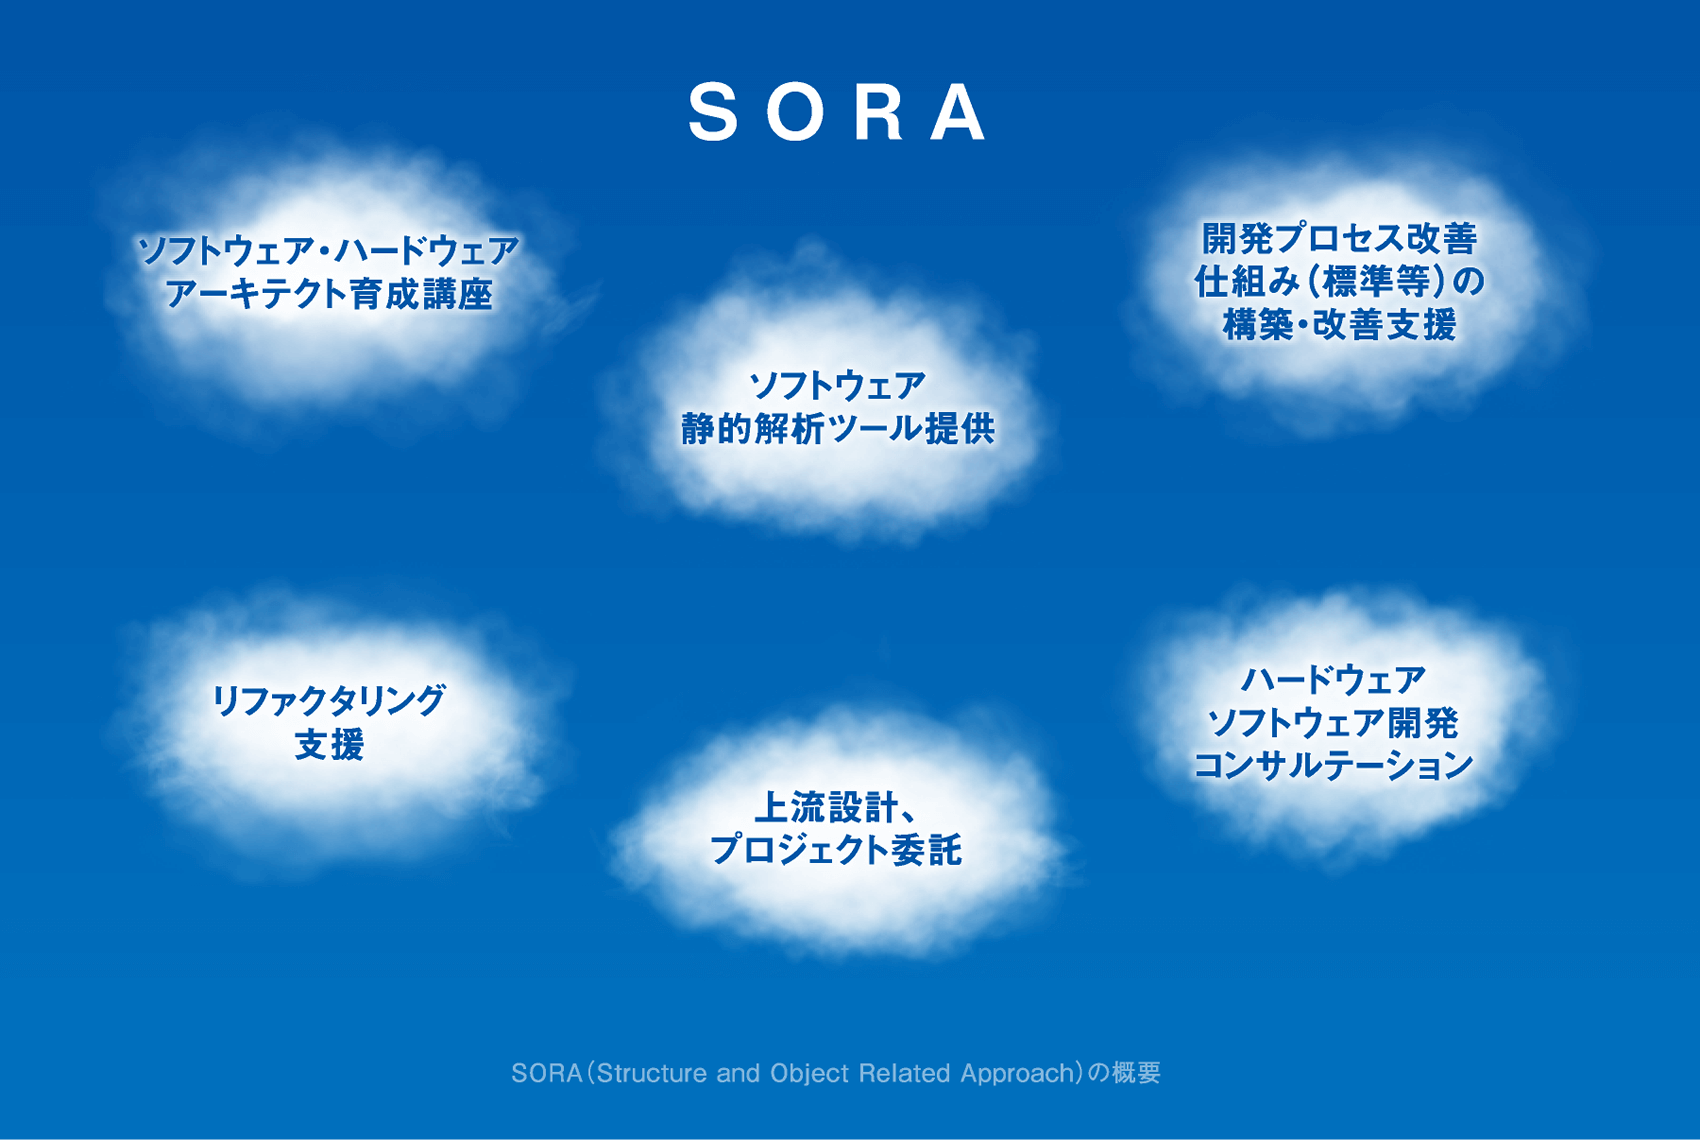 SORA(Structure and Object Related Approach)の概要